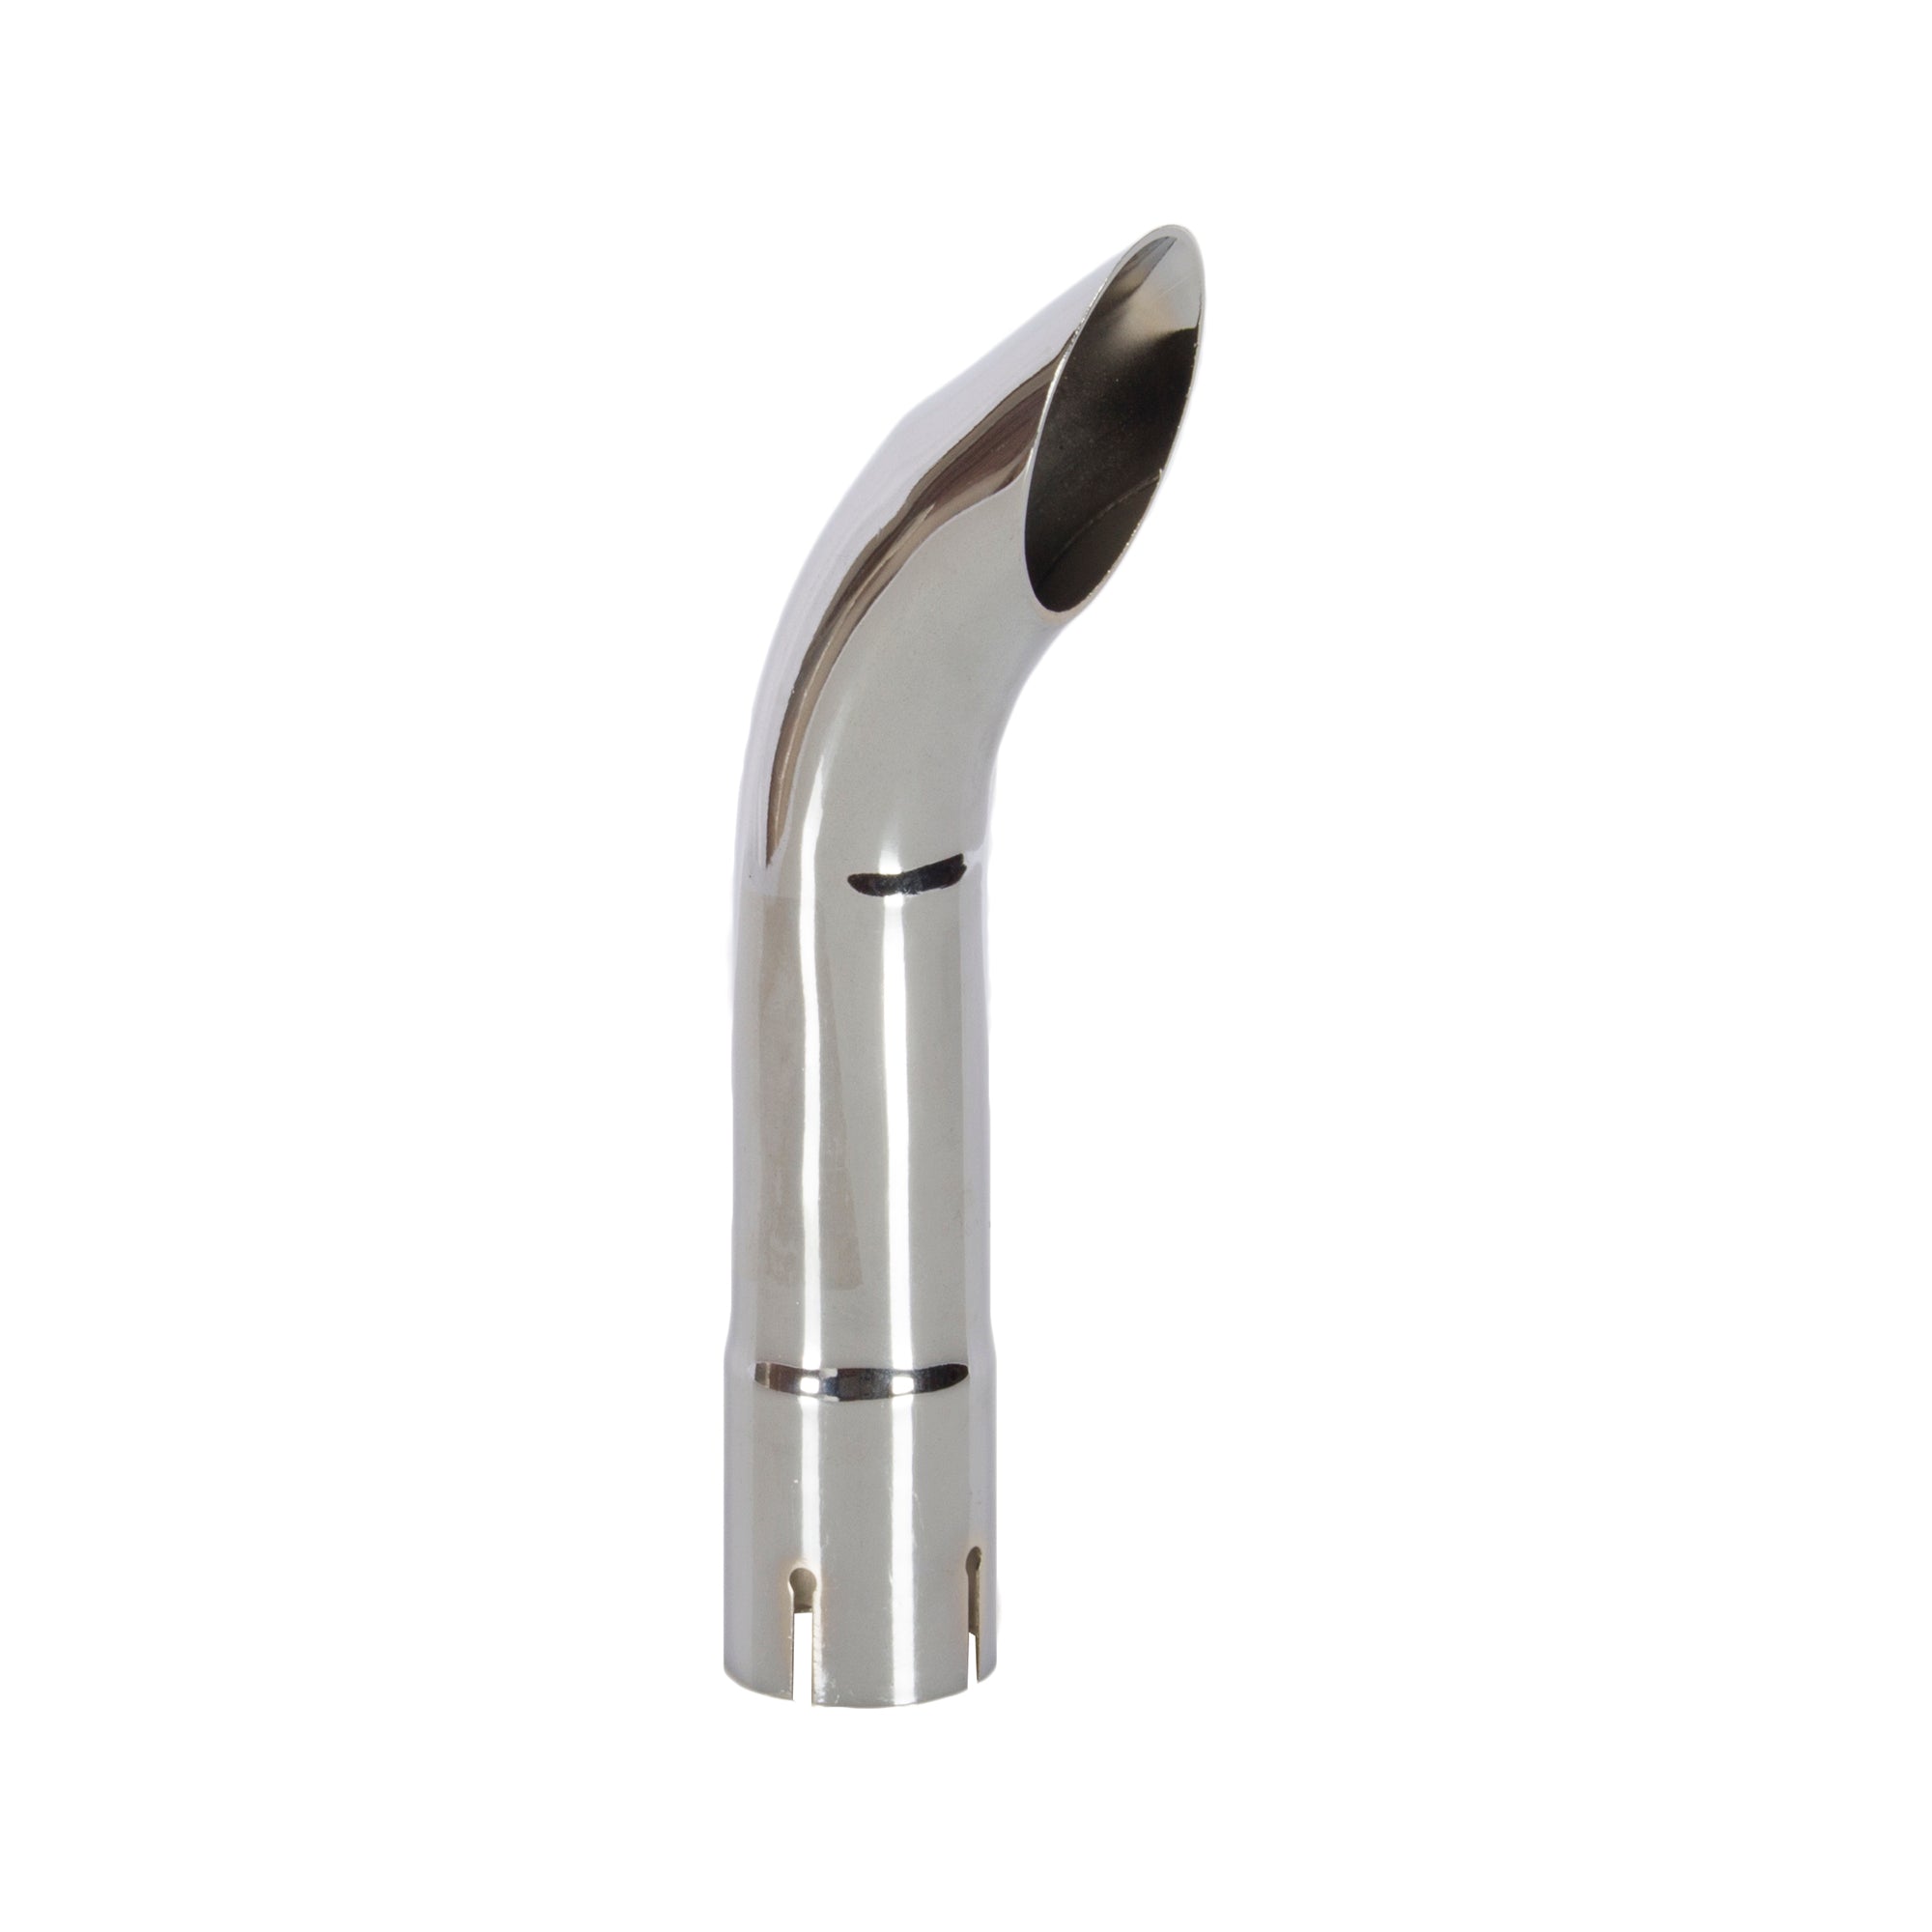 Exhaust Stack Pipe   2" x 12" Curved Chrome